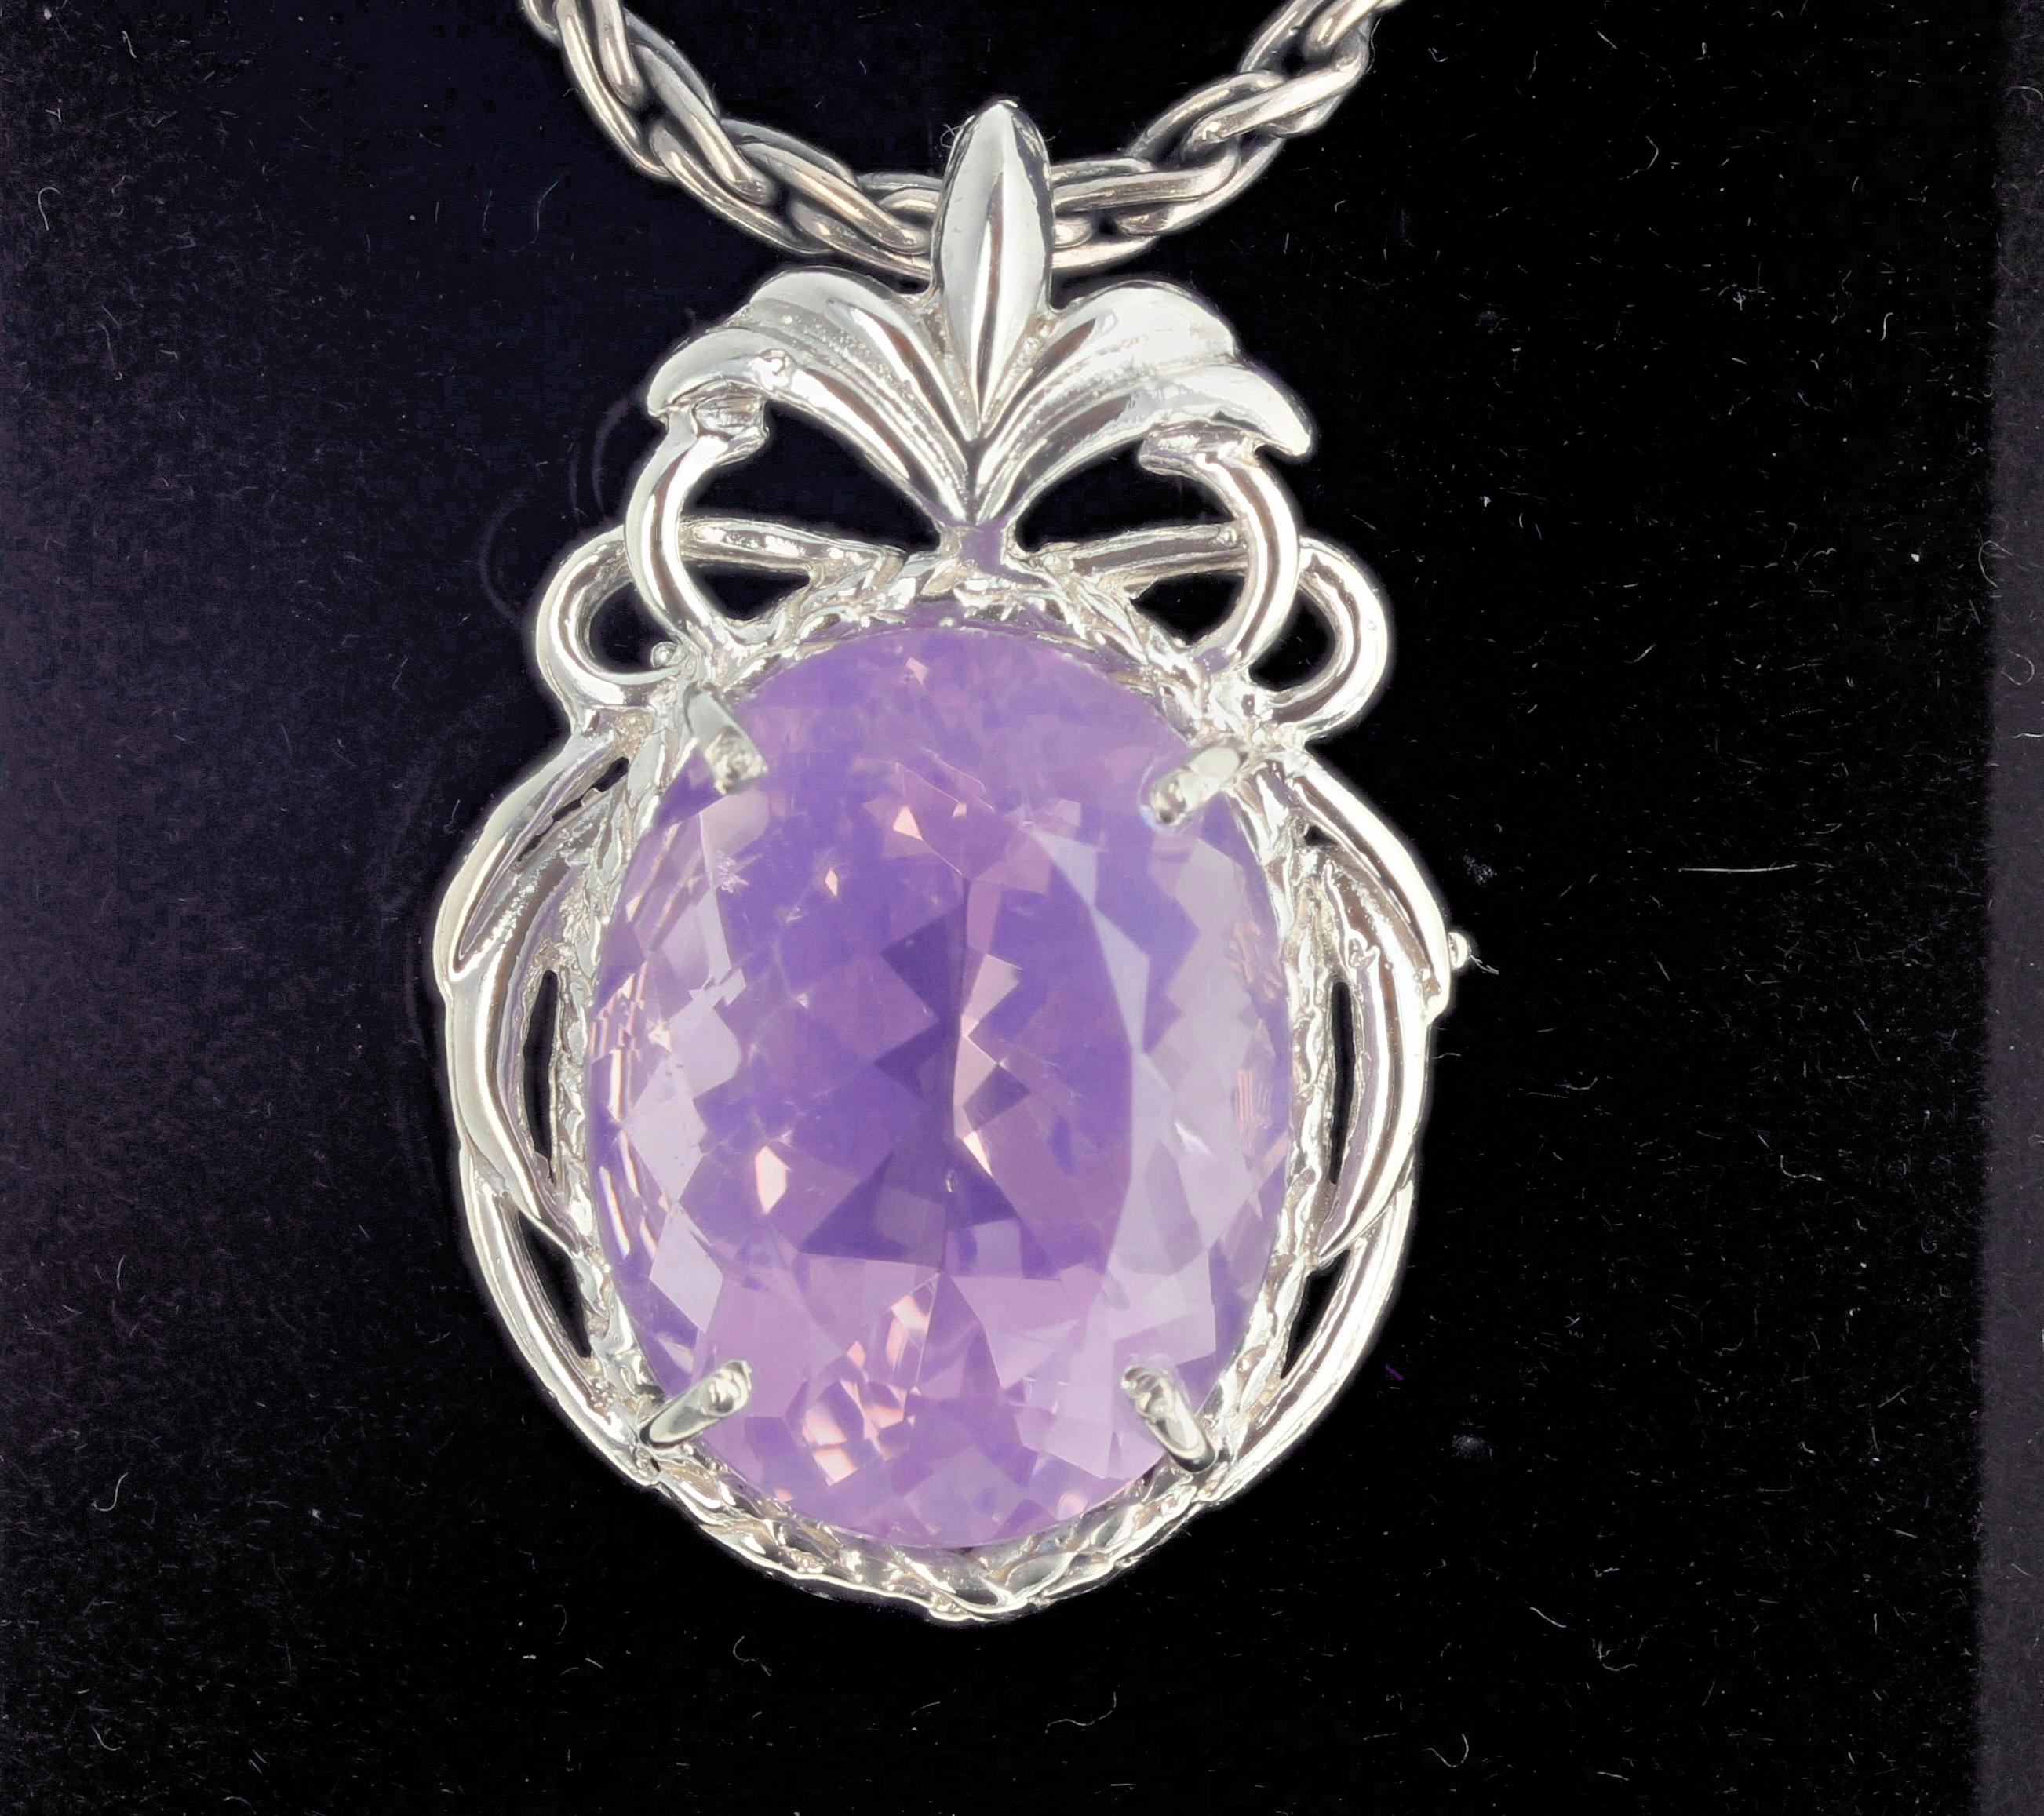 Extraordinary unique 41 carat Lavender Amethyst (22 mm x 17 mm) changes its color from pinky to purpley every time it moves.  There are no eye visible inclusions, it is approximately 1.5 inches long,  and it glitters from every direction but doesn't